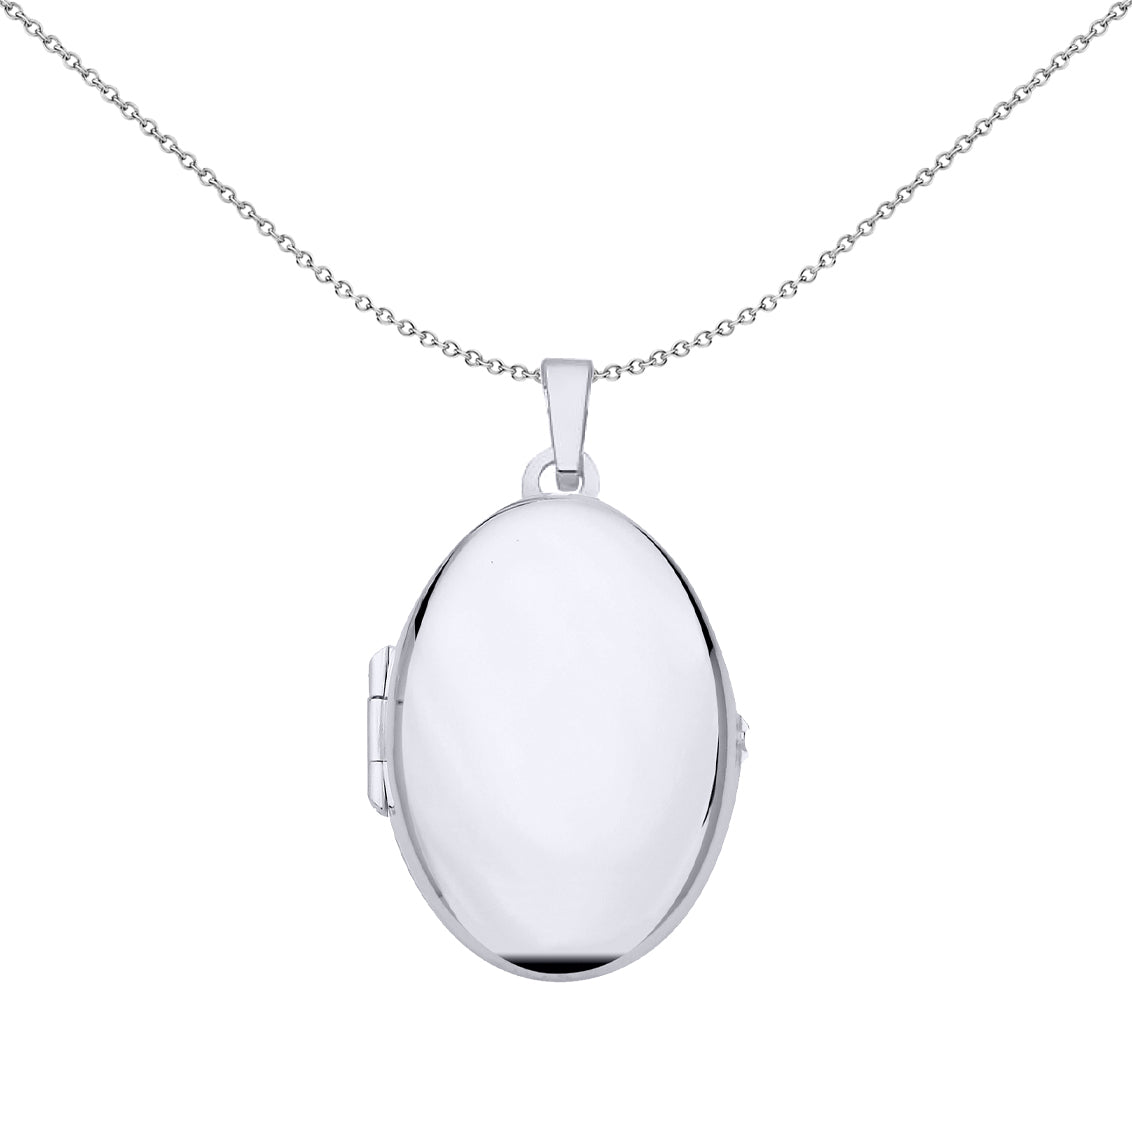 Silver  Disc Tag Charm Oval Locket Pendant Necklace - LK74